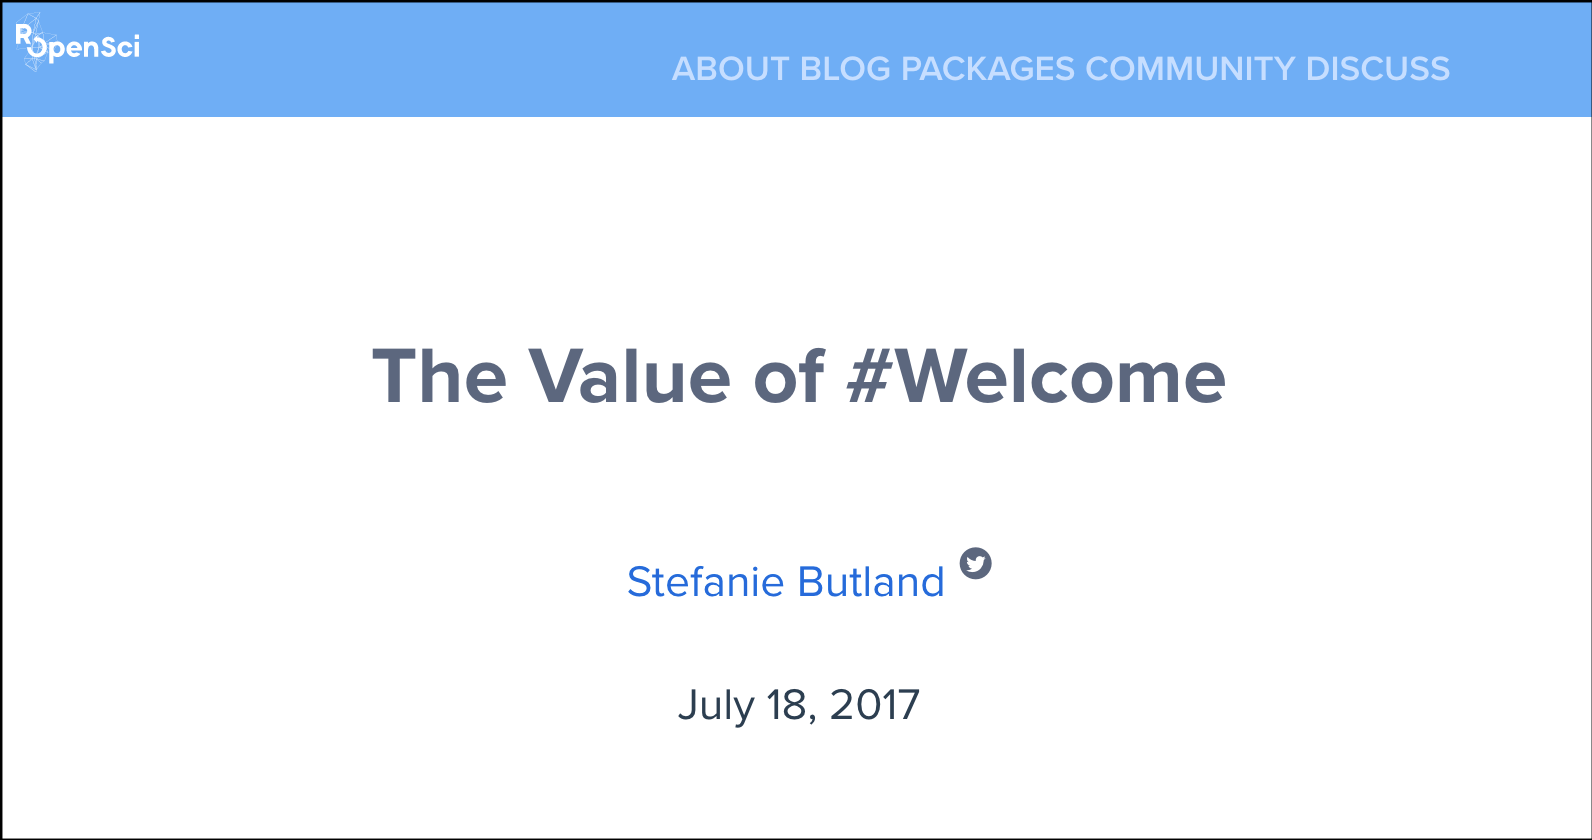 Screenshot of Stefanie Butland's blog post about the value of welcome